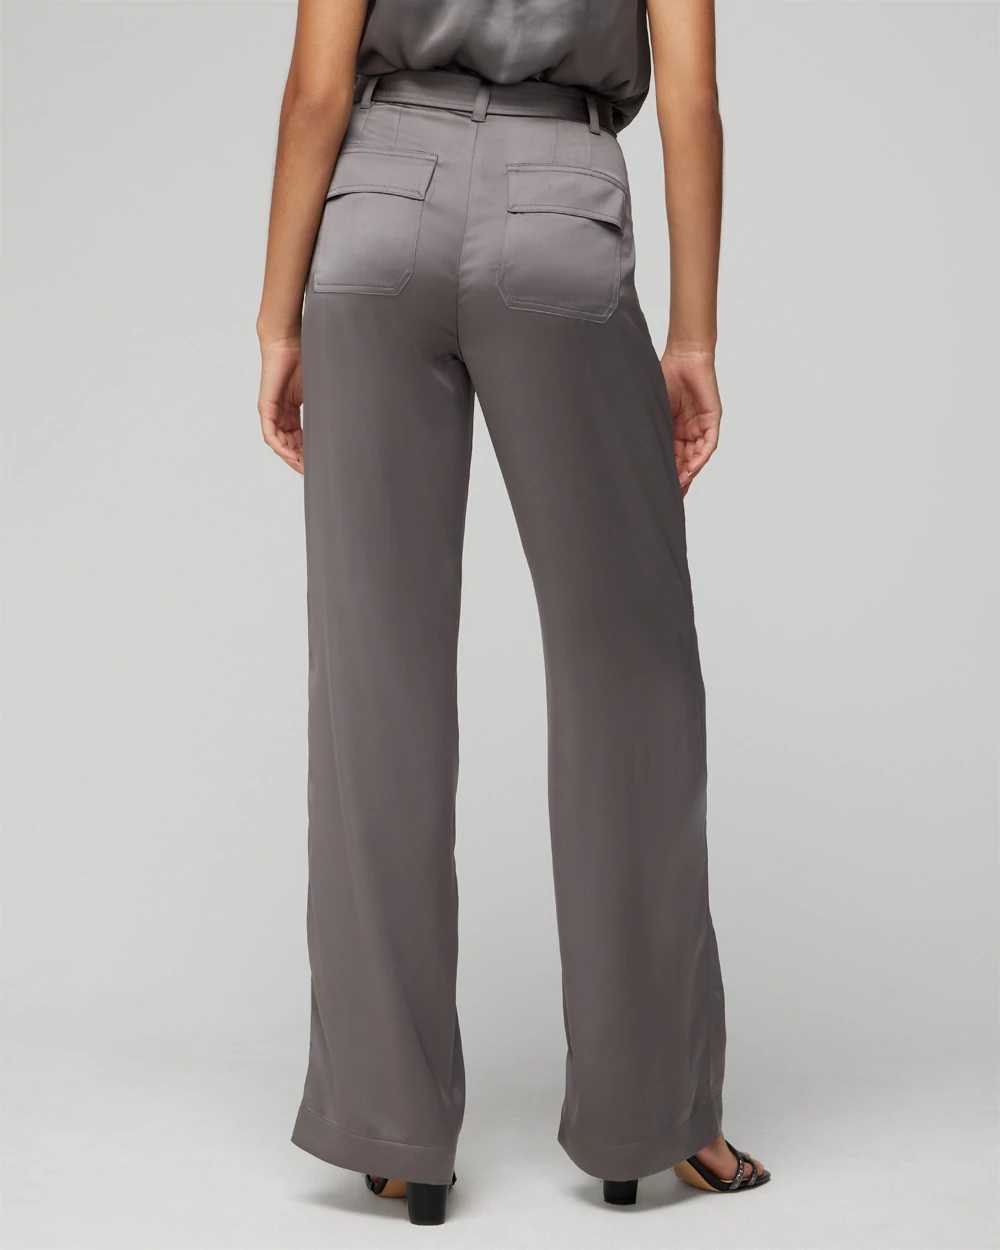 Belted Utility Wide Leg Trouser click to view larger image.